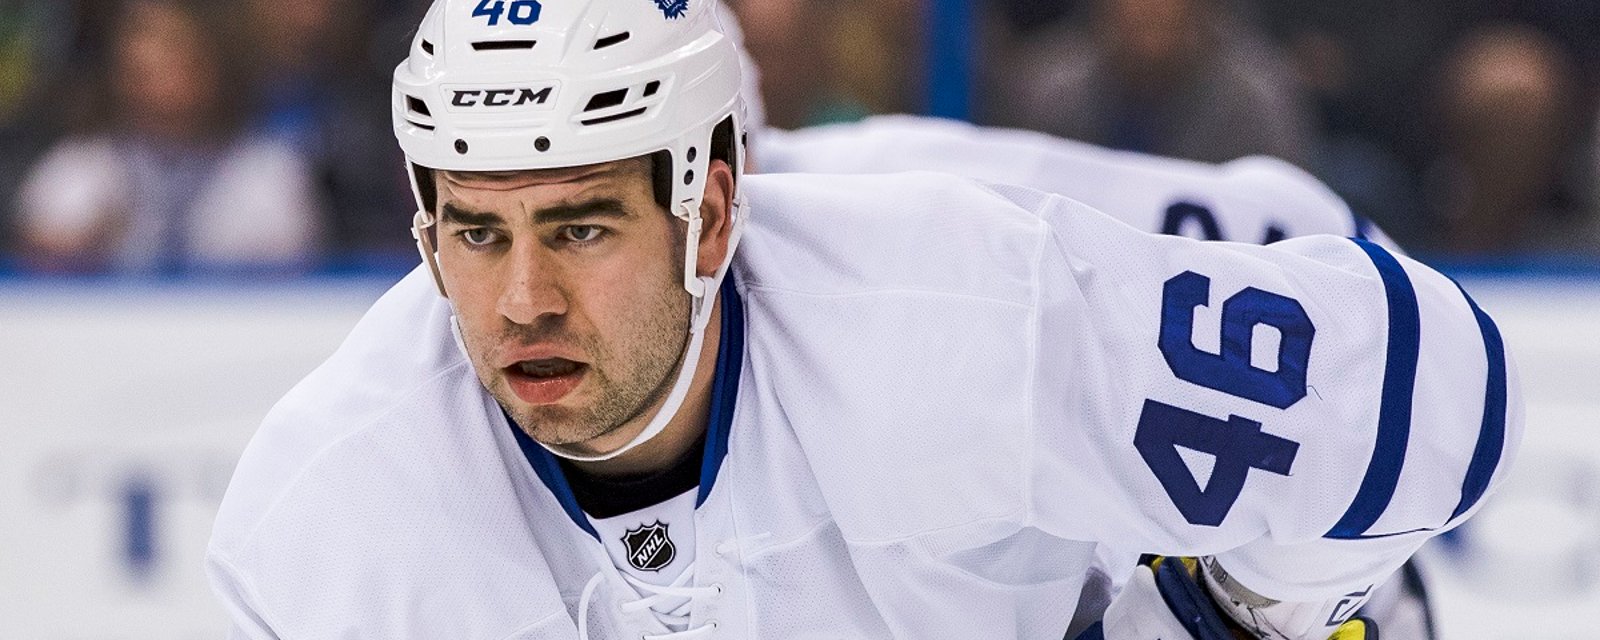 Roman Polak appears to hint that Babcock's coaching style may not work for the Leafs.